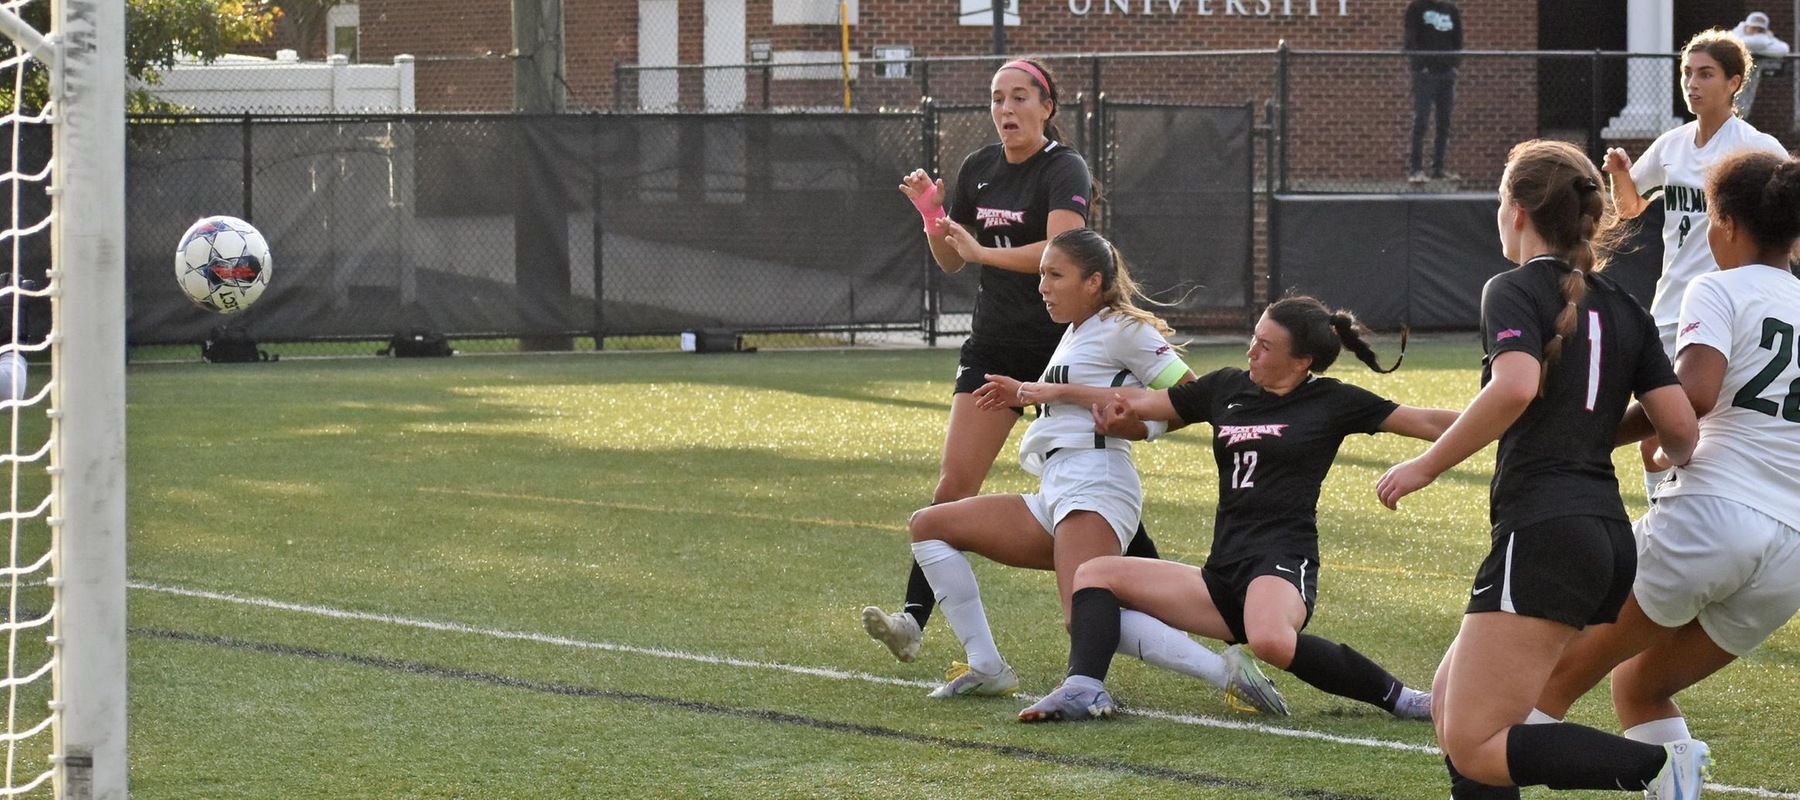 Wilmington University’s Manuela Restrepo (#4) scores a goal during the NCAA Women’s soccer match against Chestnut Hill at the Wilmington University Sports Complex in Newark, Delaware, October 17, 2023. Photo By Katelyn Hurley.